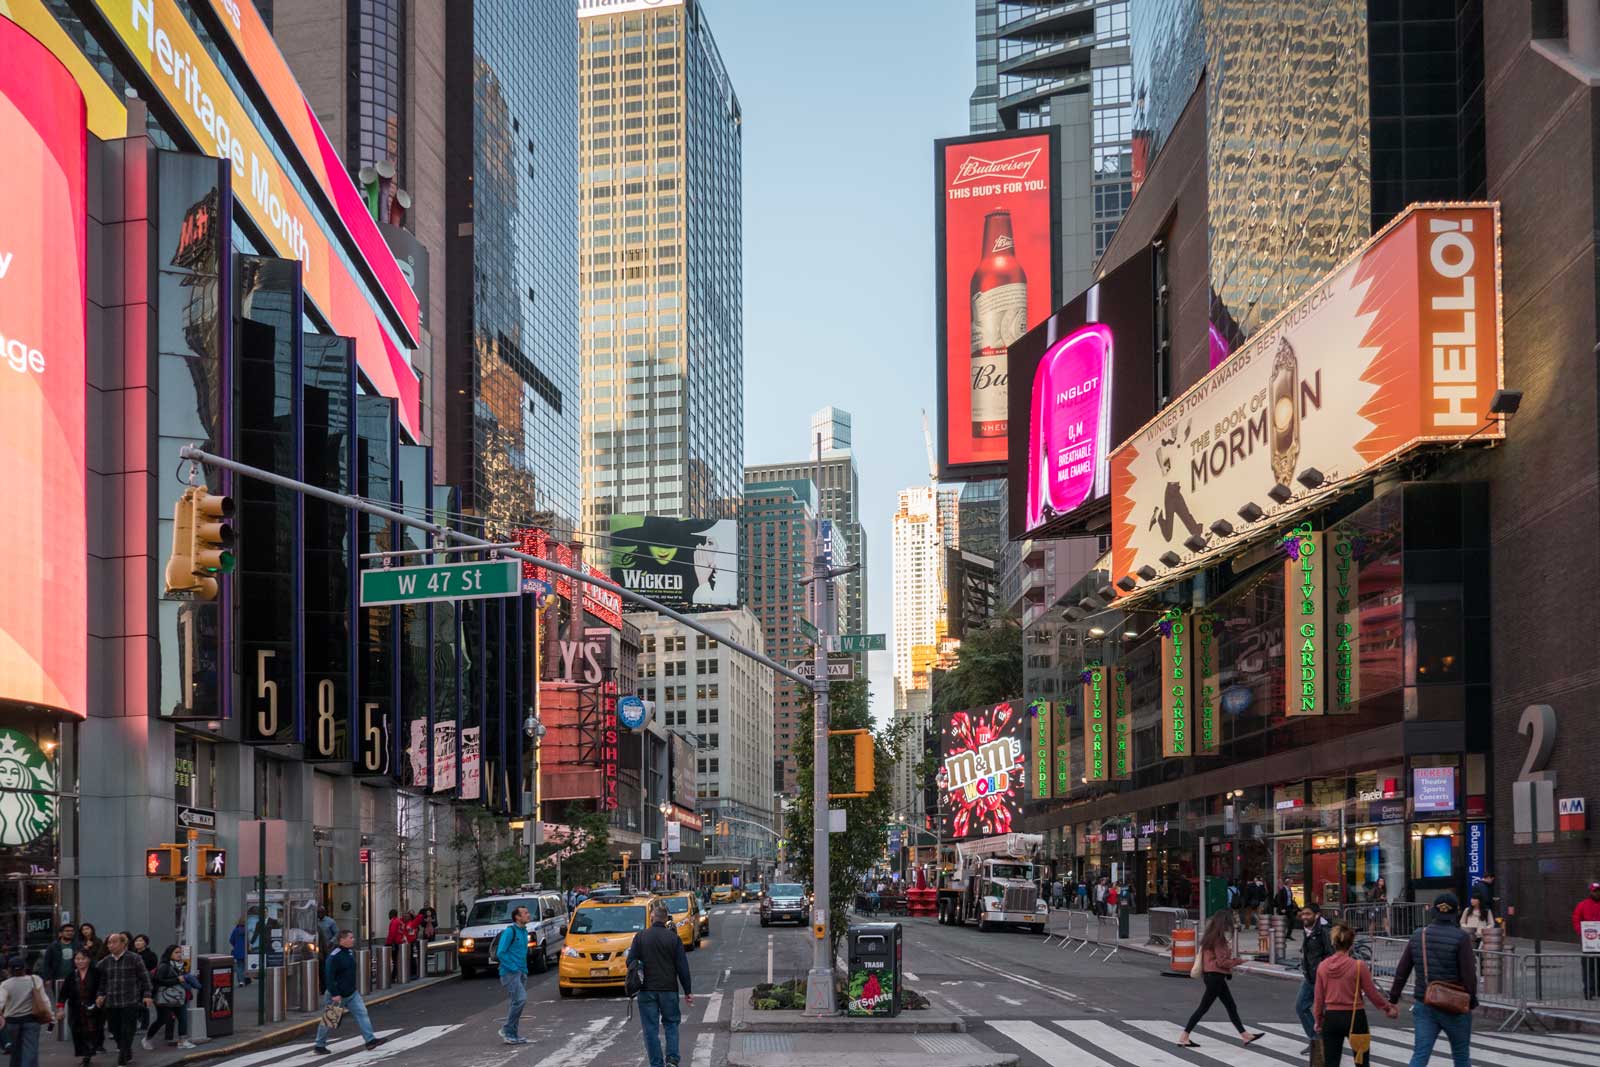 NYC Myths Debunked Times Square is the most exciting part of New York